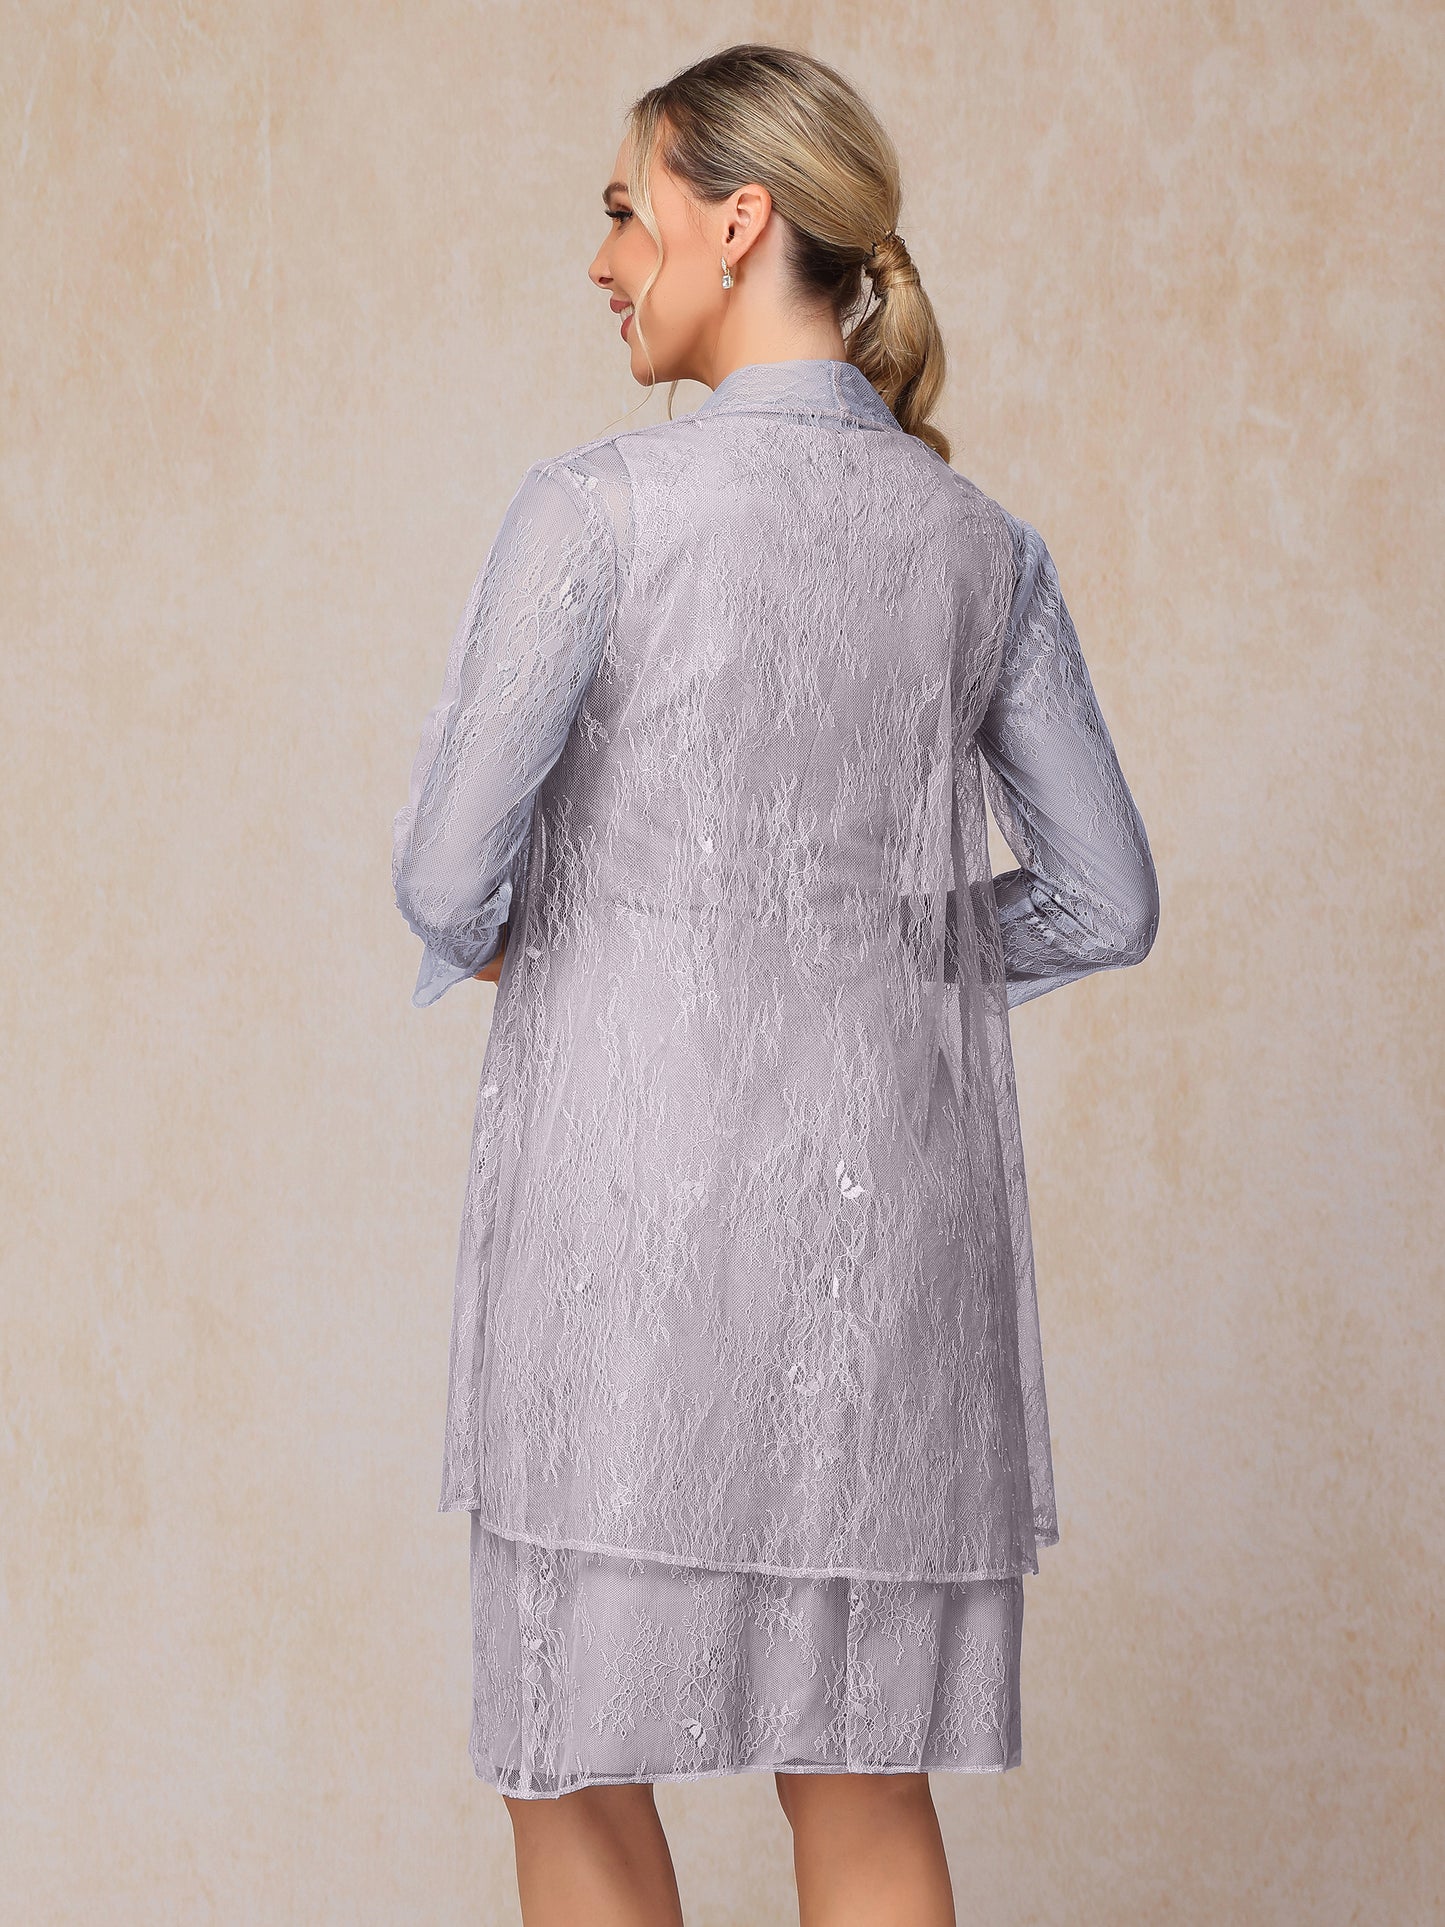 2 Pieces Knee Length Chiffon Lace Mother Of The Bride Dress